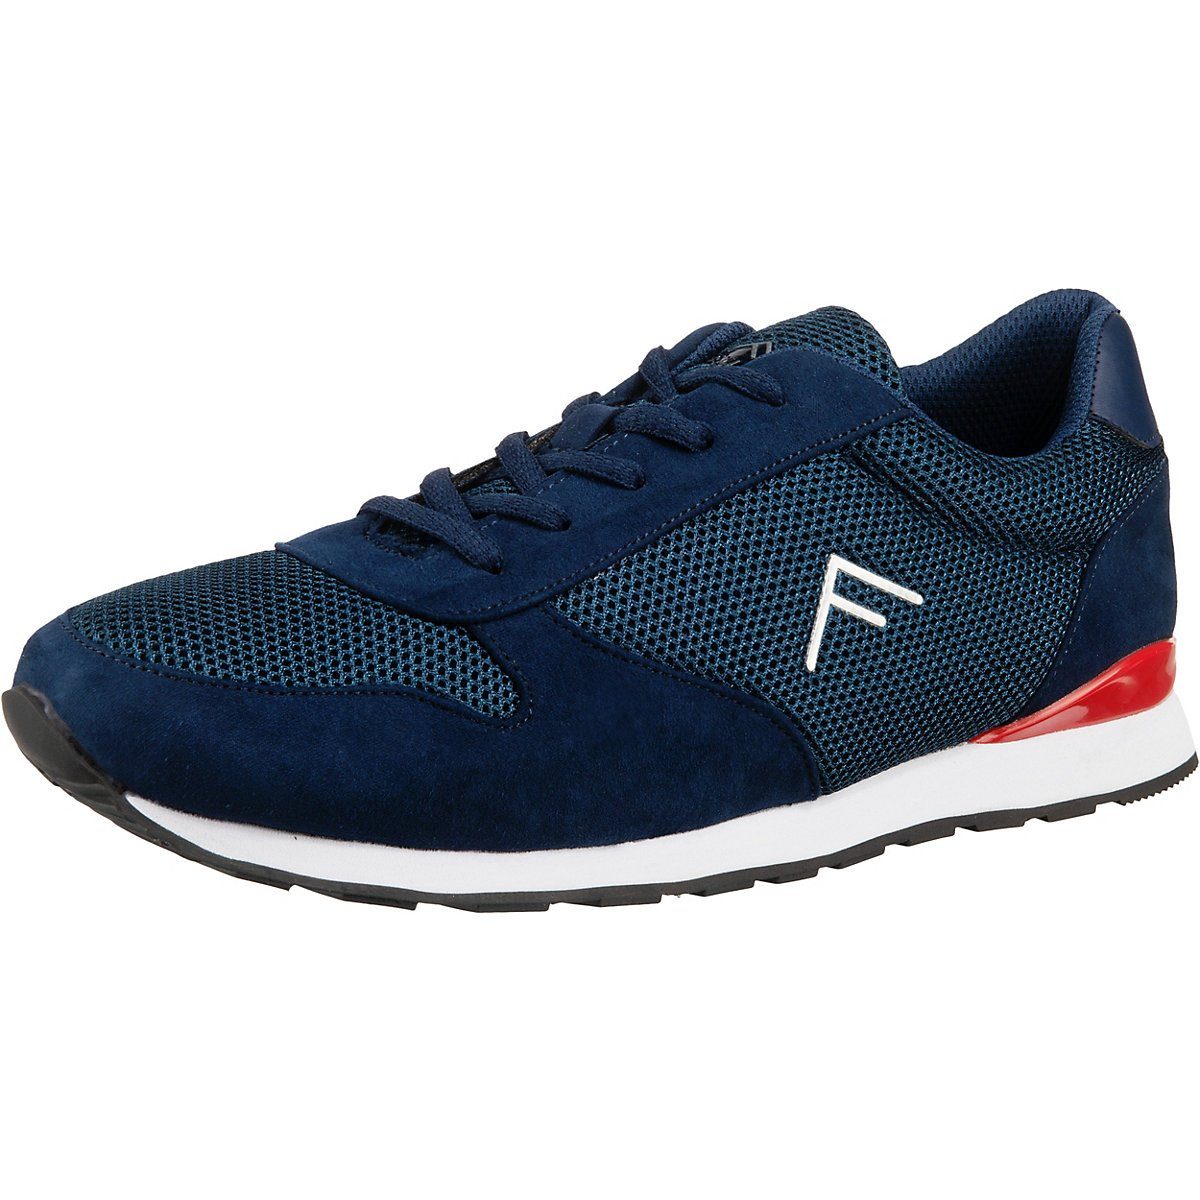 Freyling »Sneakers Low« Sneaker, Obermaterial: Textil online kaufen | OTTO